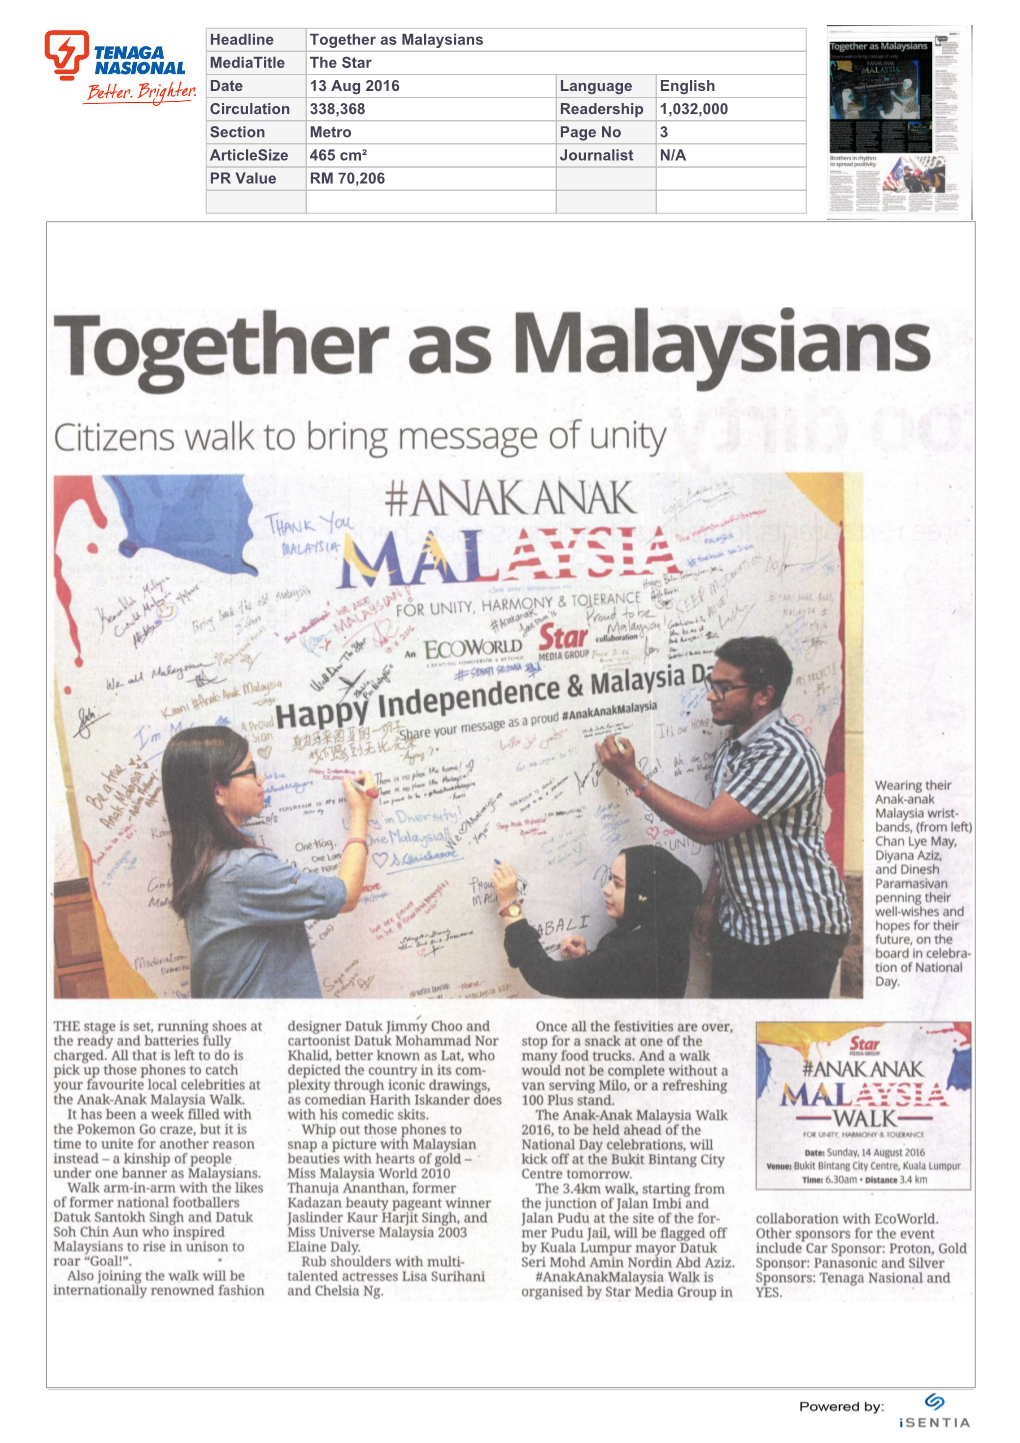 Together As Malaysians